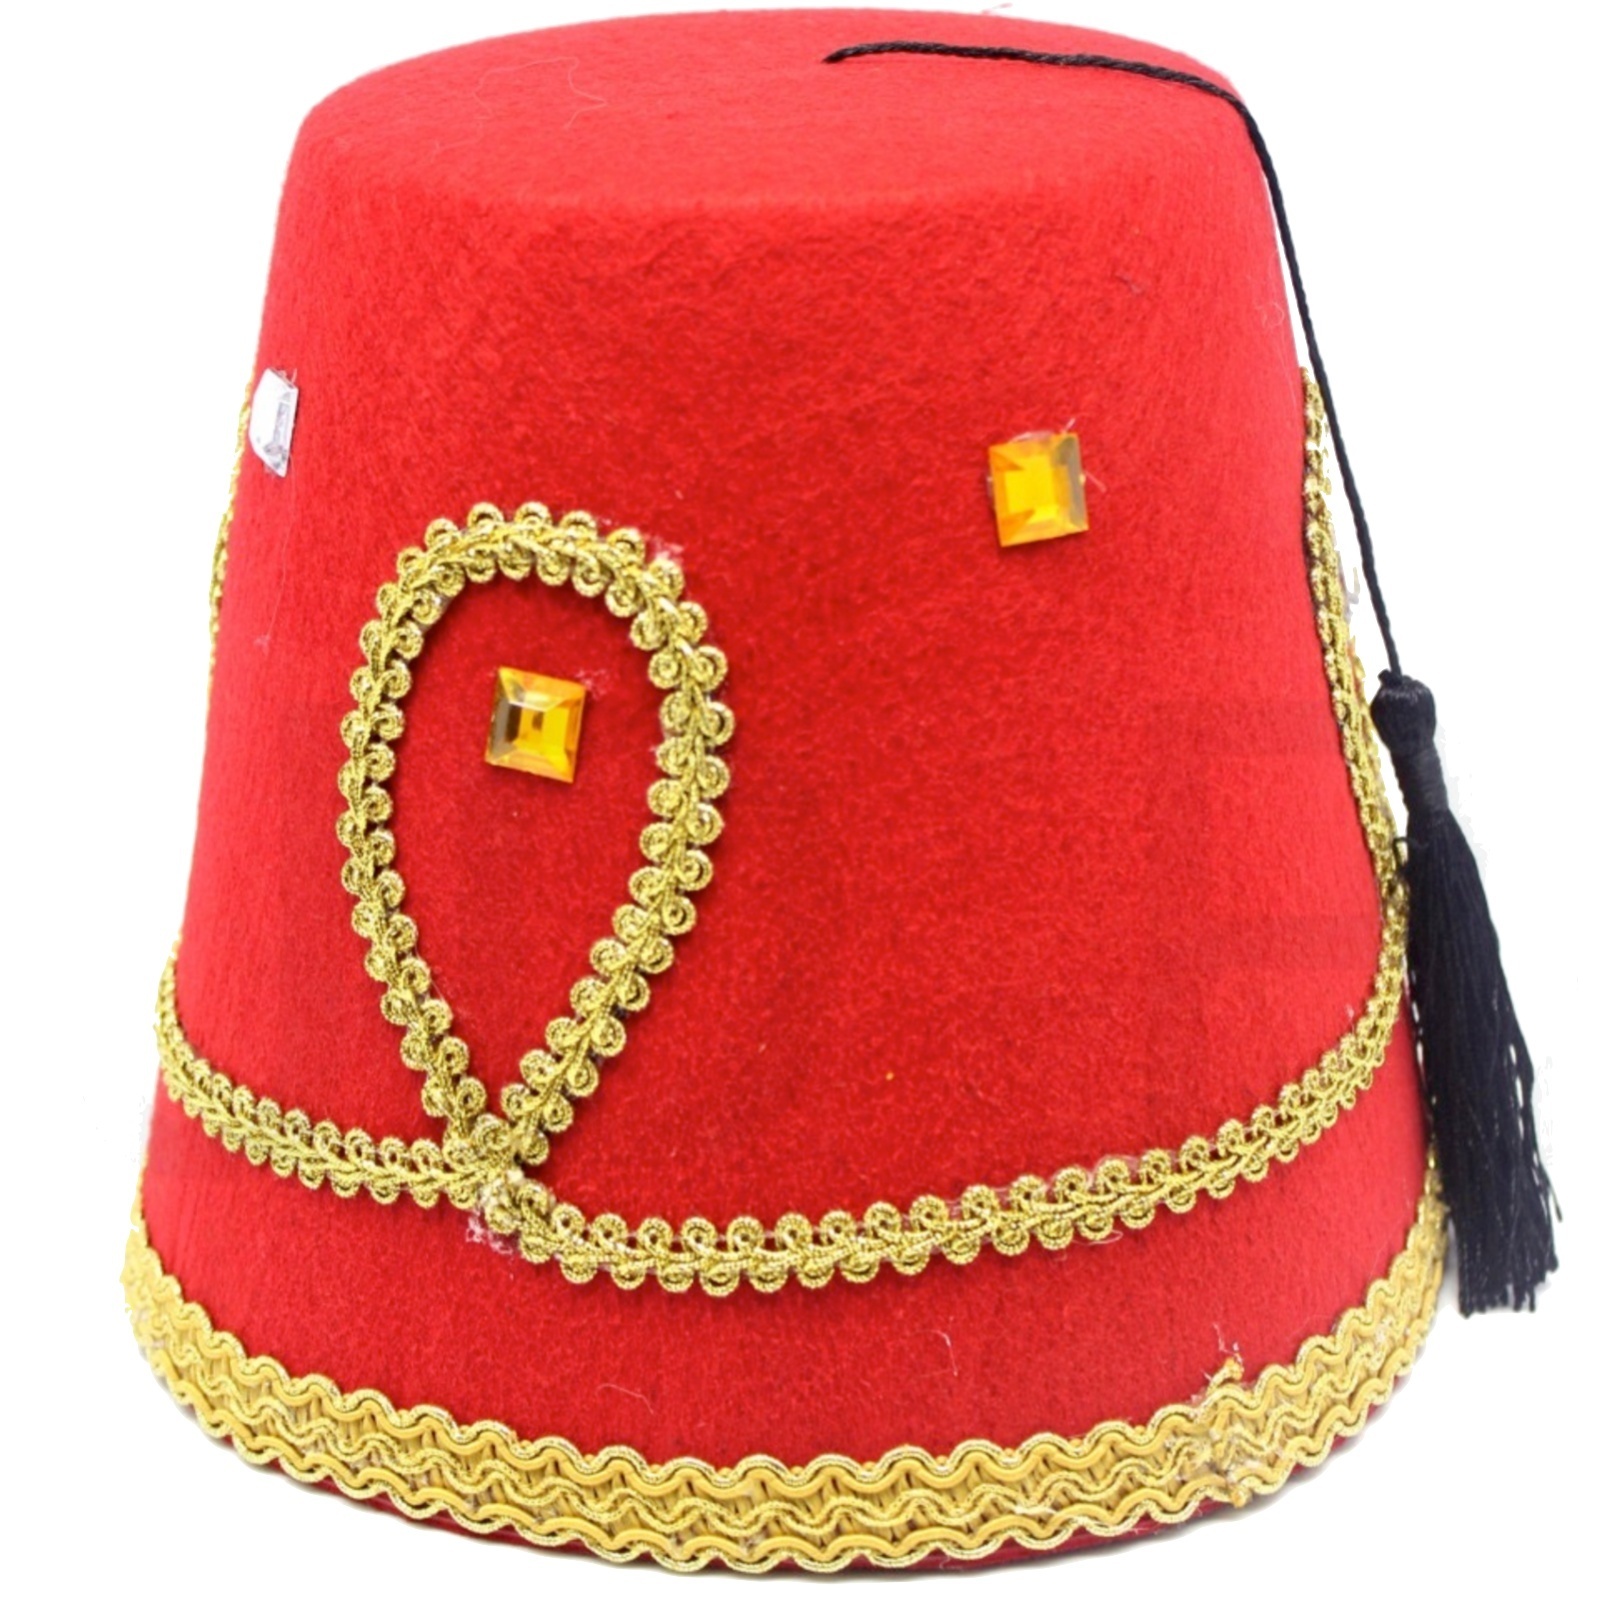 DELUXE TURKISH HAT Red Green Fez Tarboosh Dress Up Costume Party ...